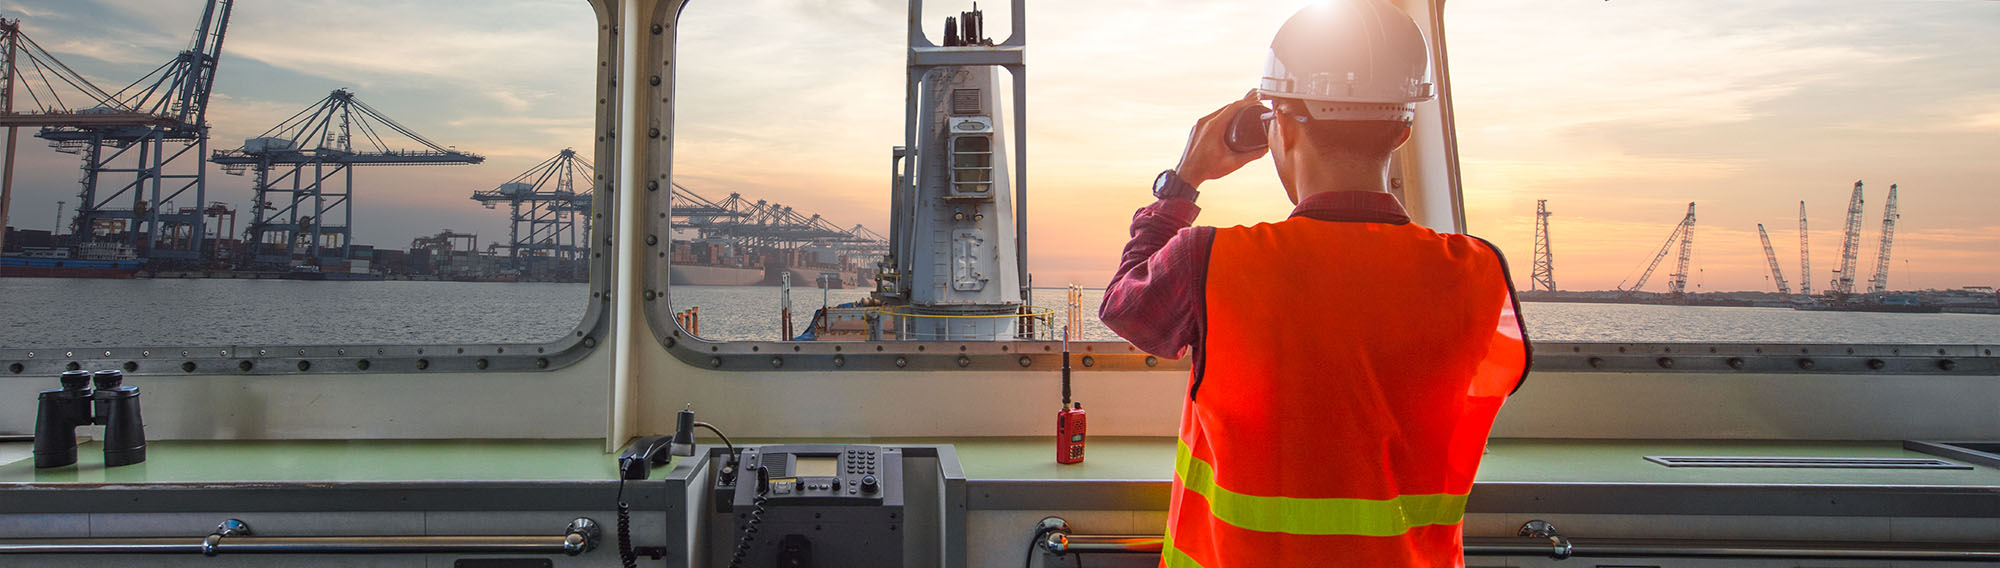 Transmarine worker with with binoculars looking out from a ship.